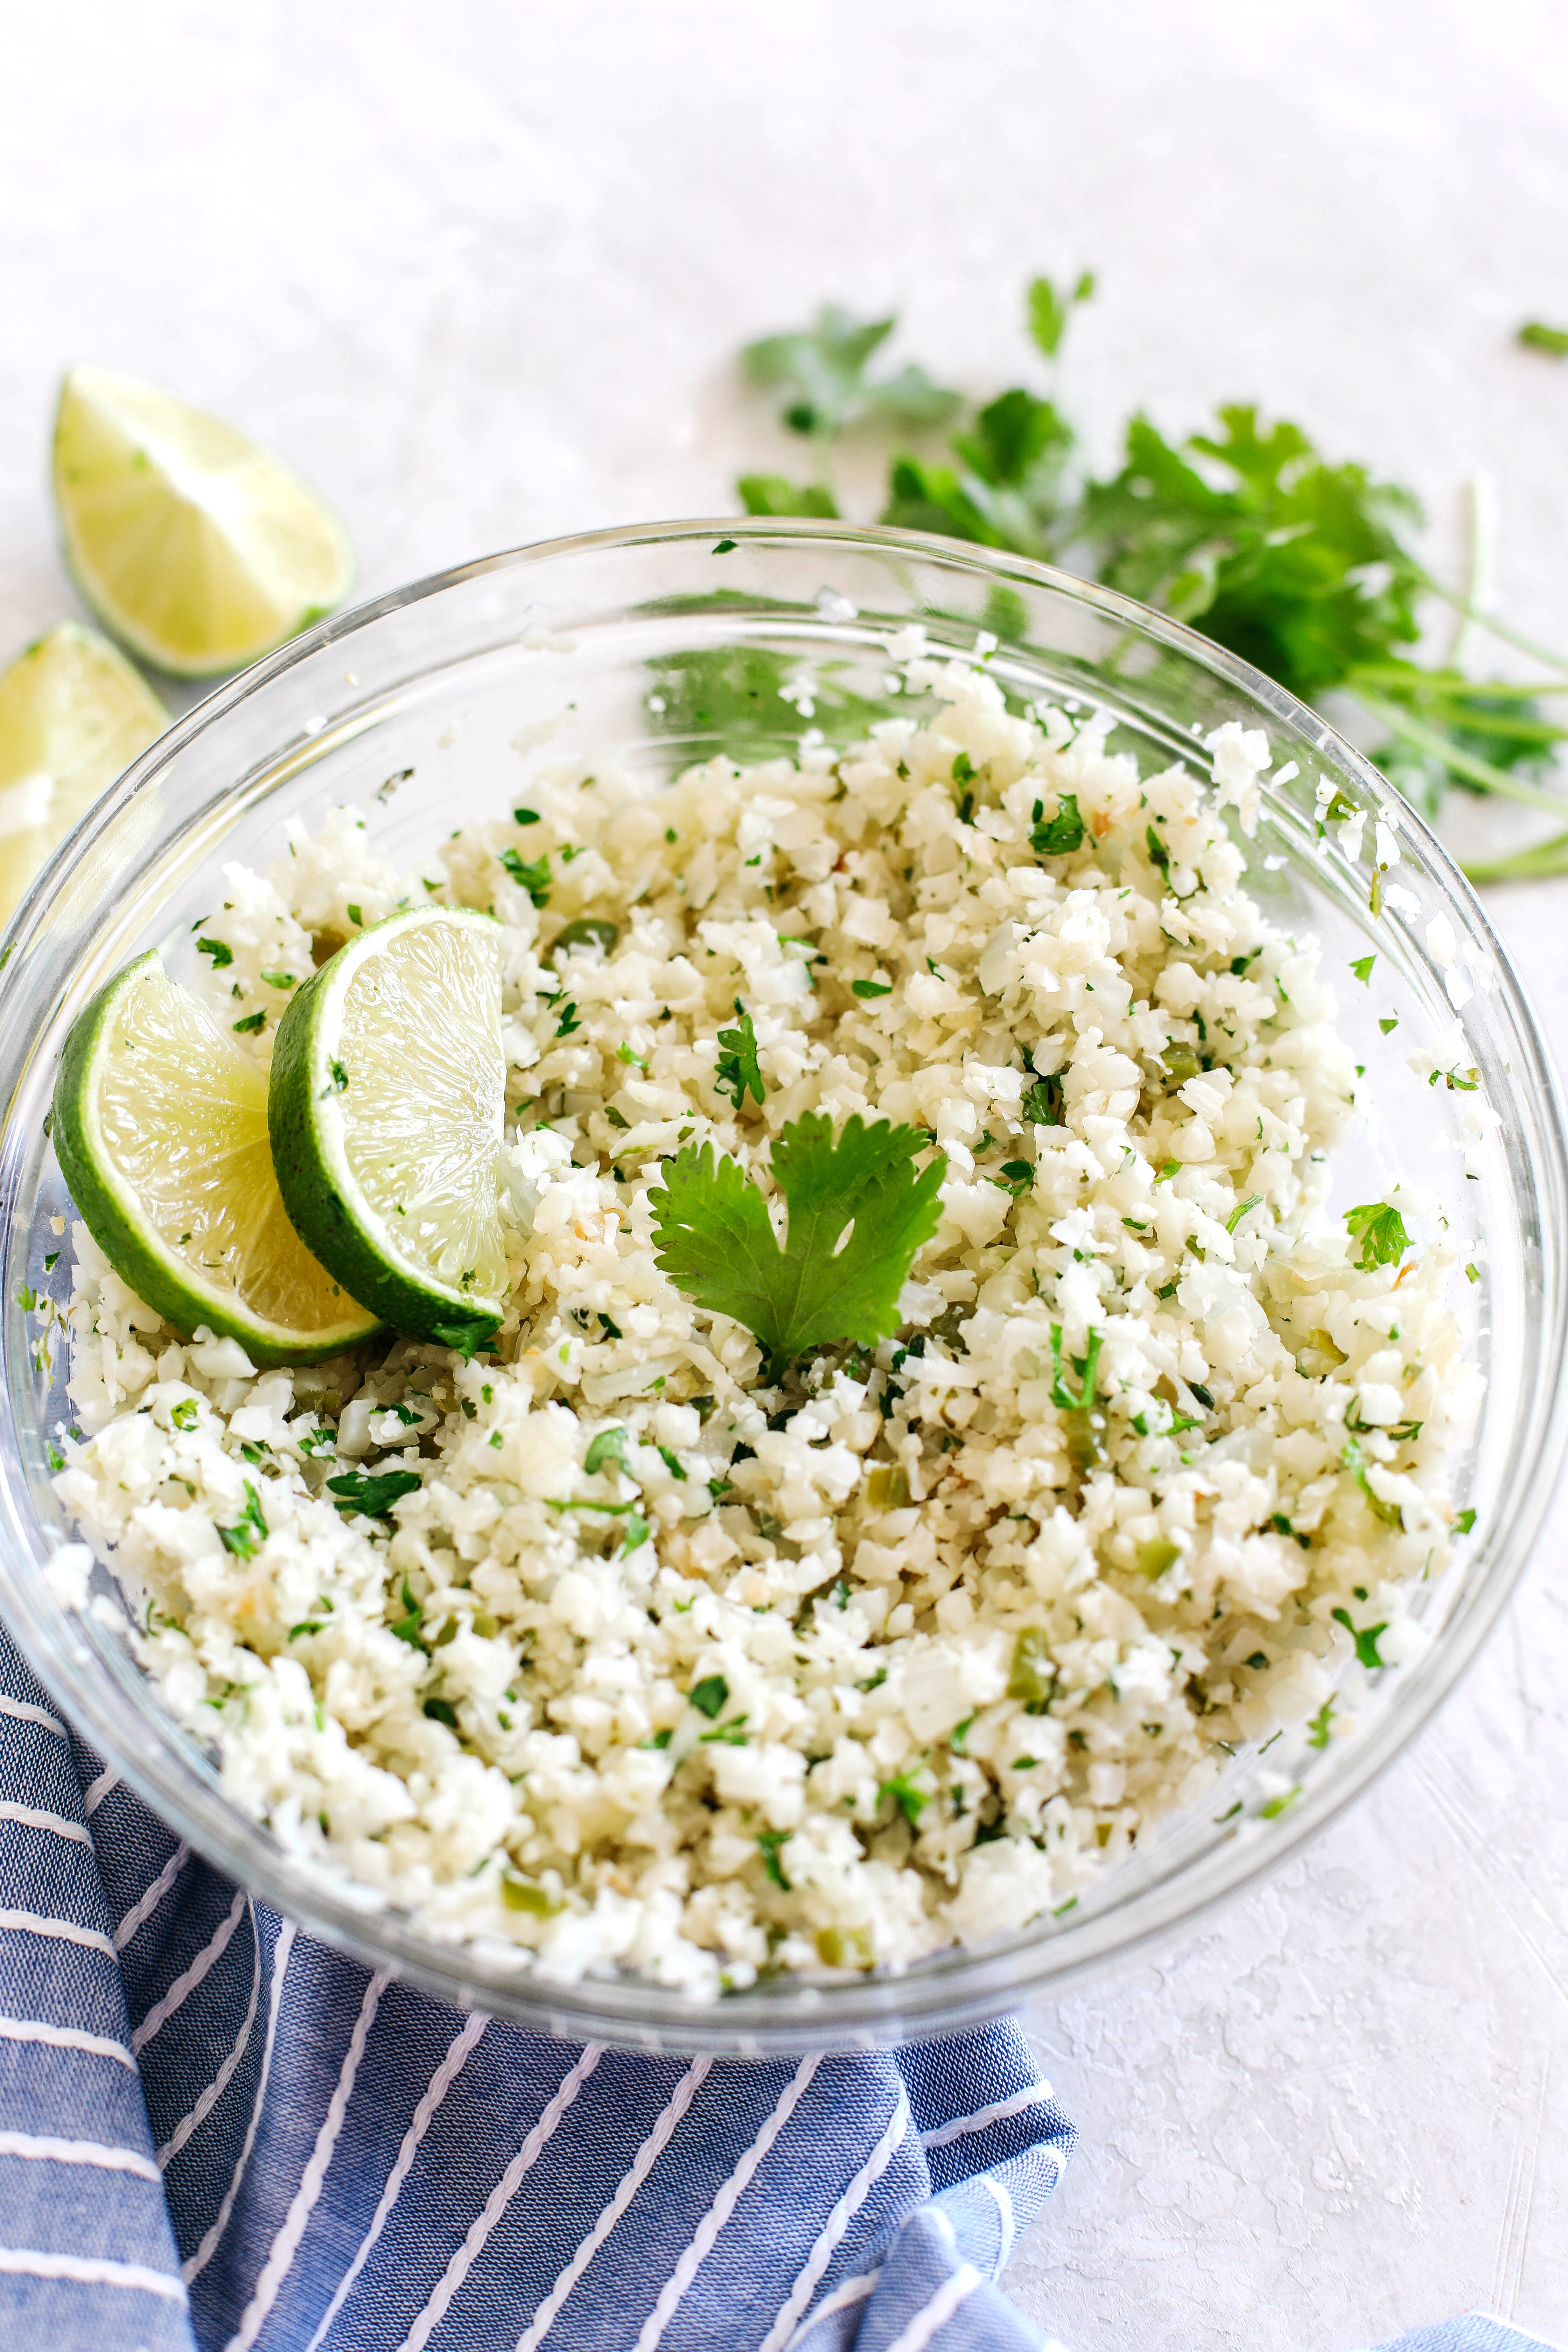 This Cilantro Lime Cauliflower Rice is the perfect low carb side dish that is healthy, delicious and easily made in minutes with just a few simple ingredients!